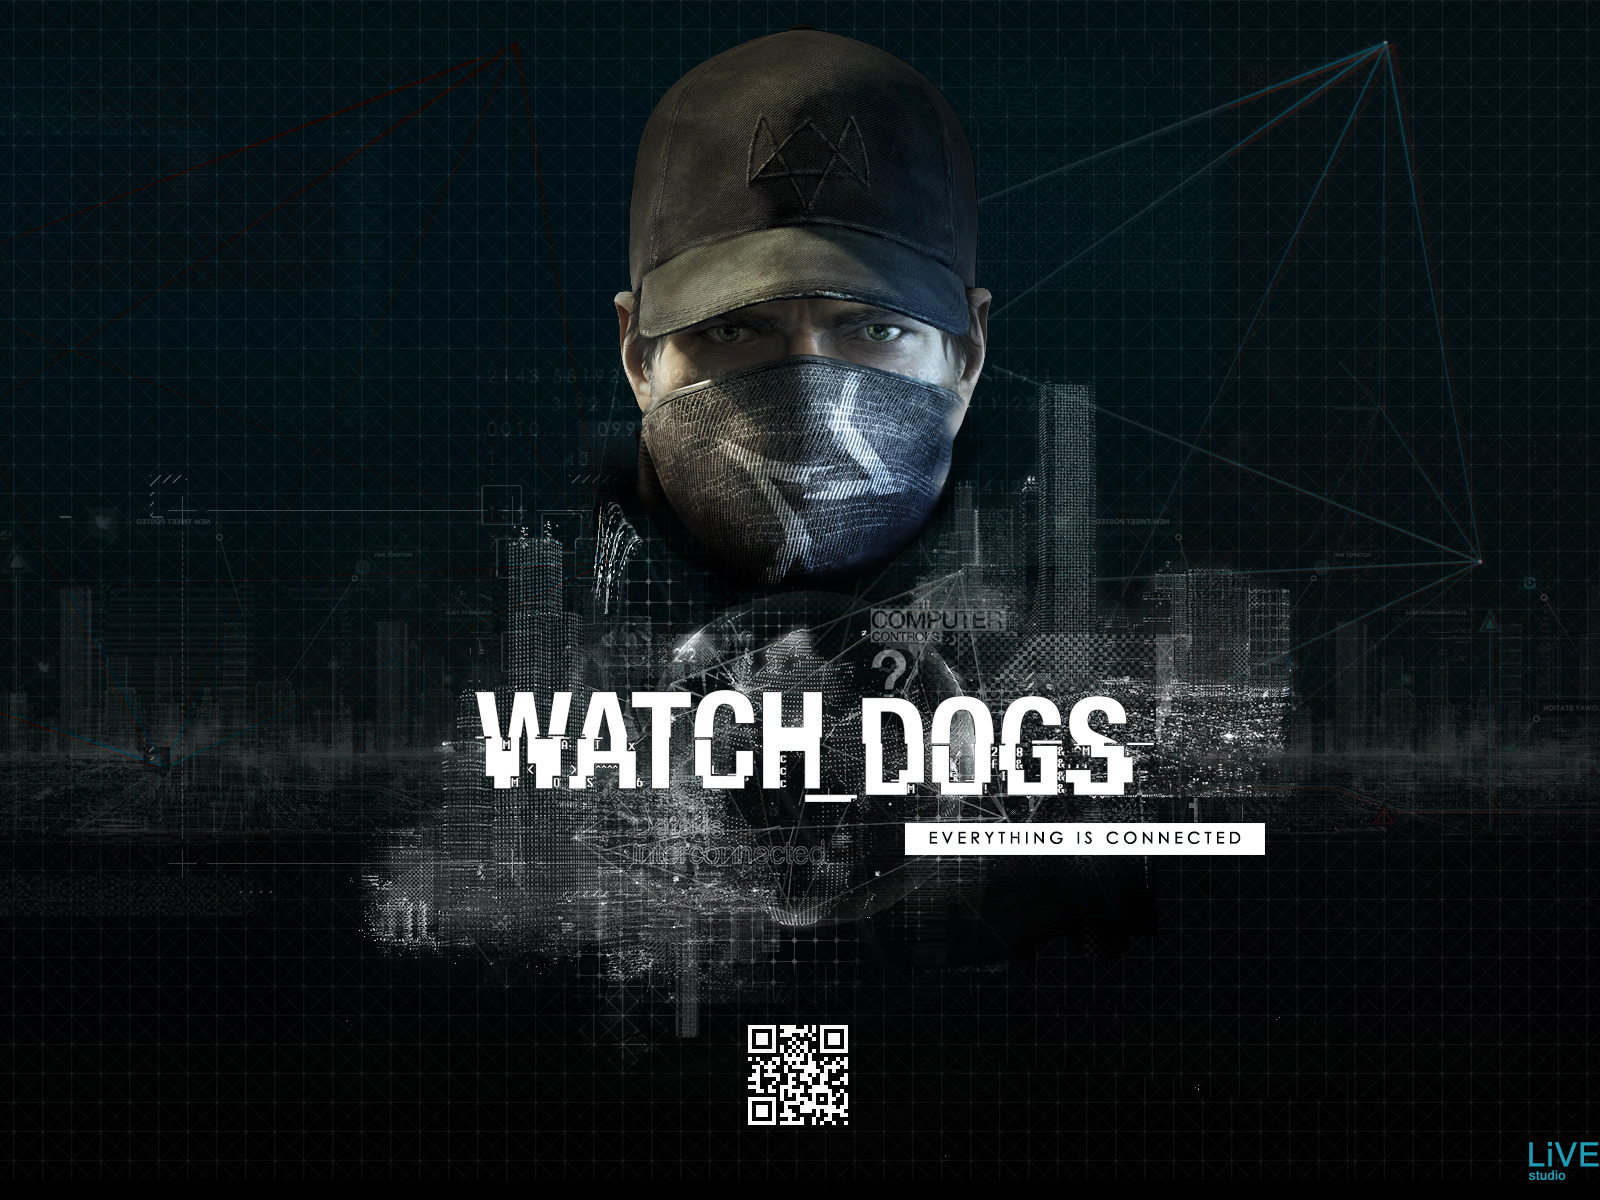 The watch dogs steam фото 66